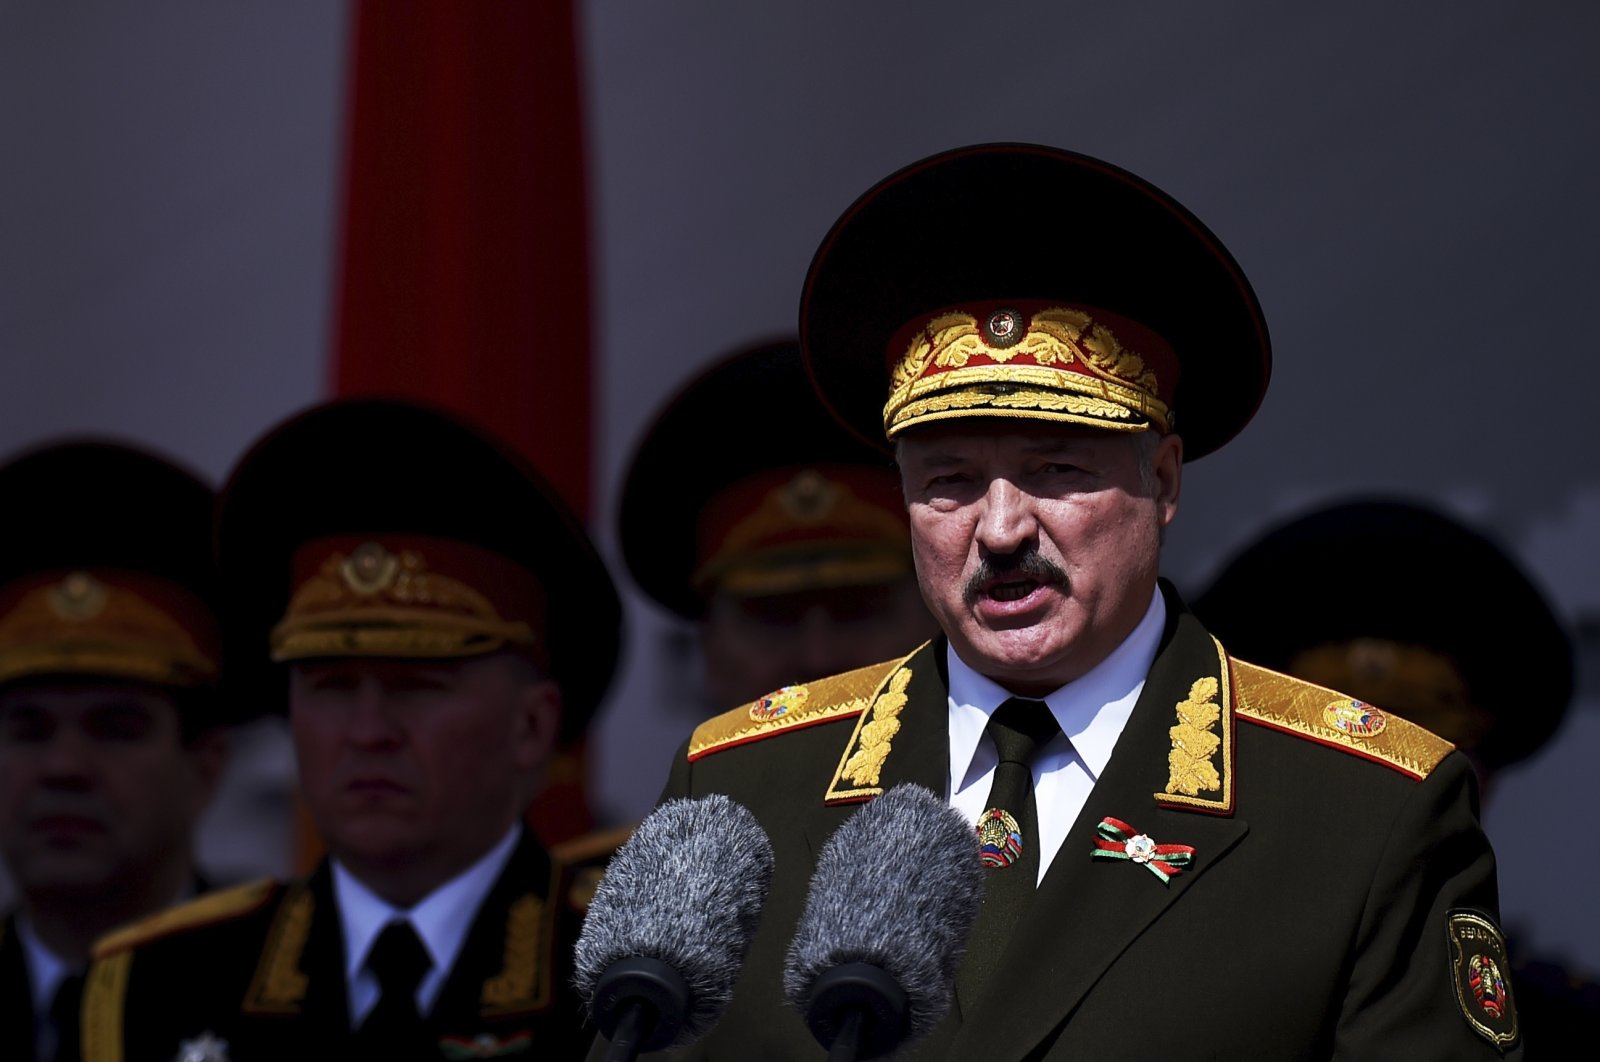 Belarusian President Alexander Lukashenko gives a speech during a military parade that marked the 75th anniversary of the allied victory over Nazi Germany, in Minsk, Belarus, May 9, 2020. (AP Photo)